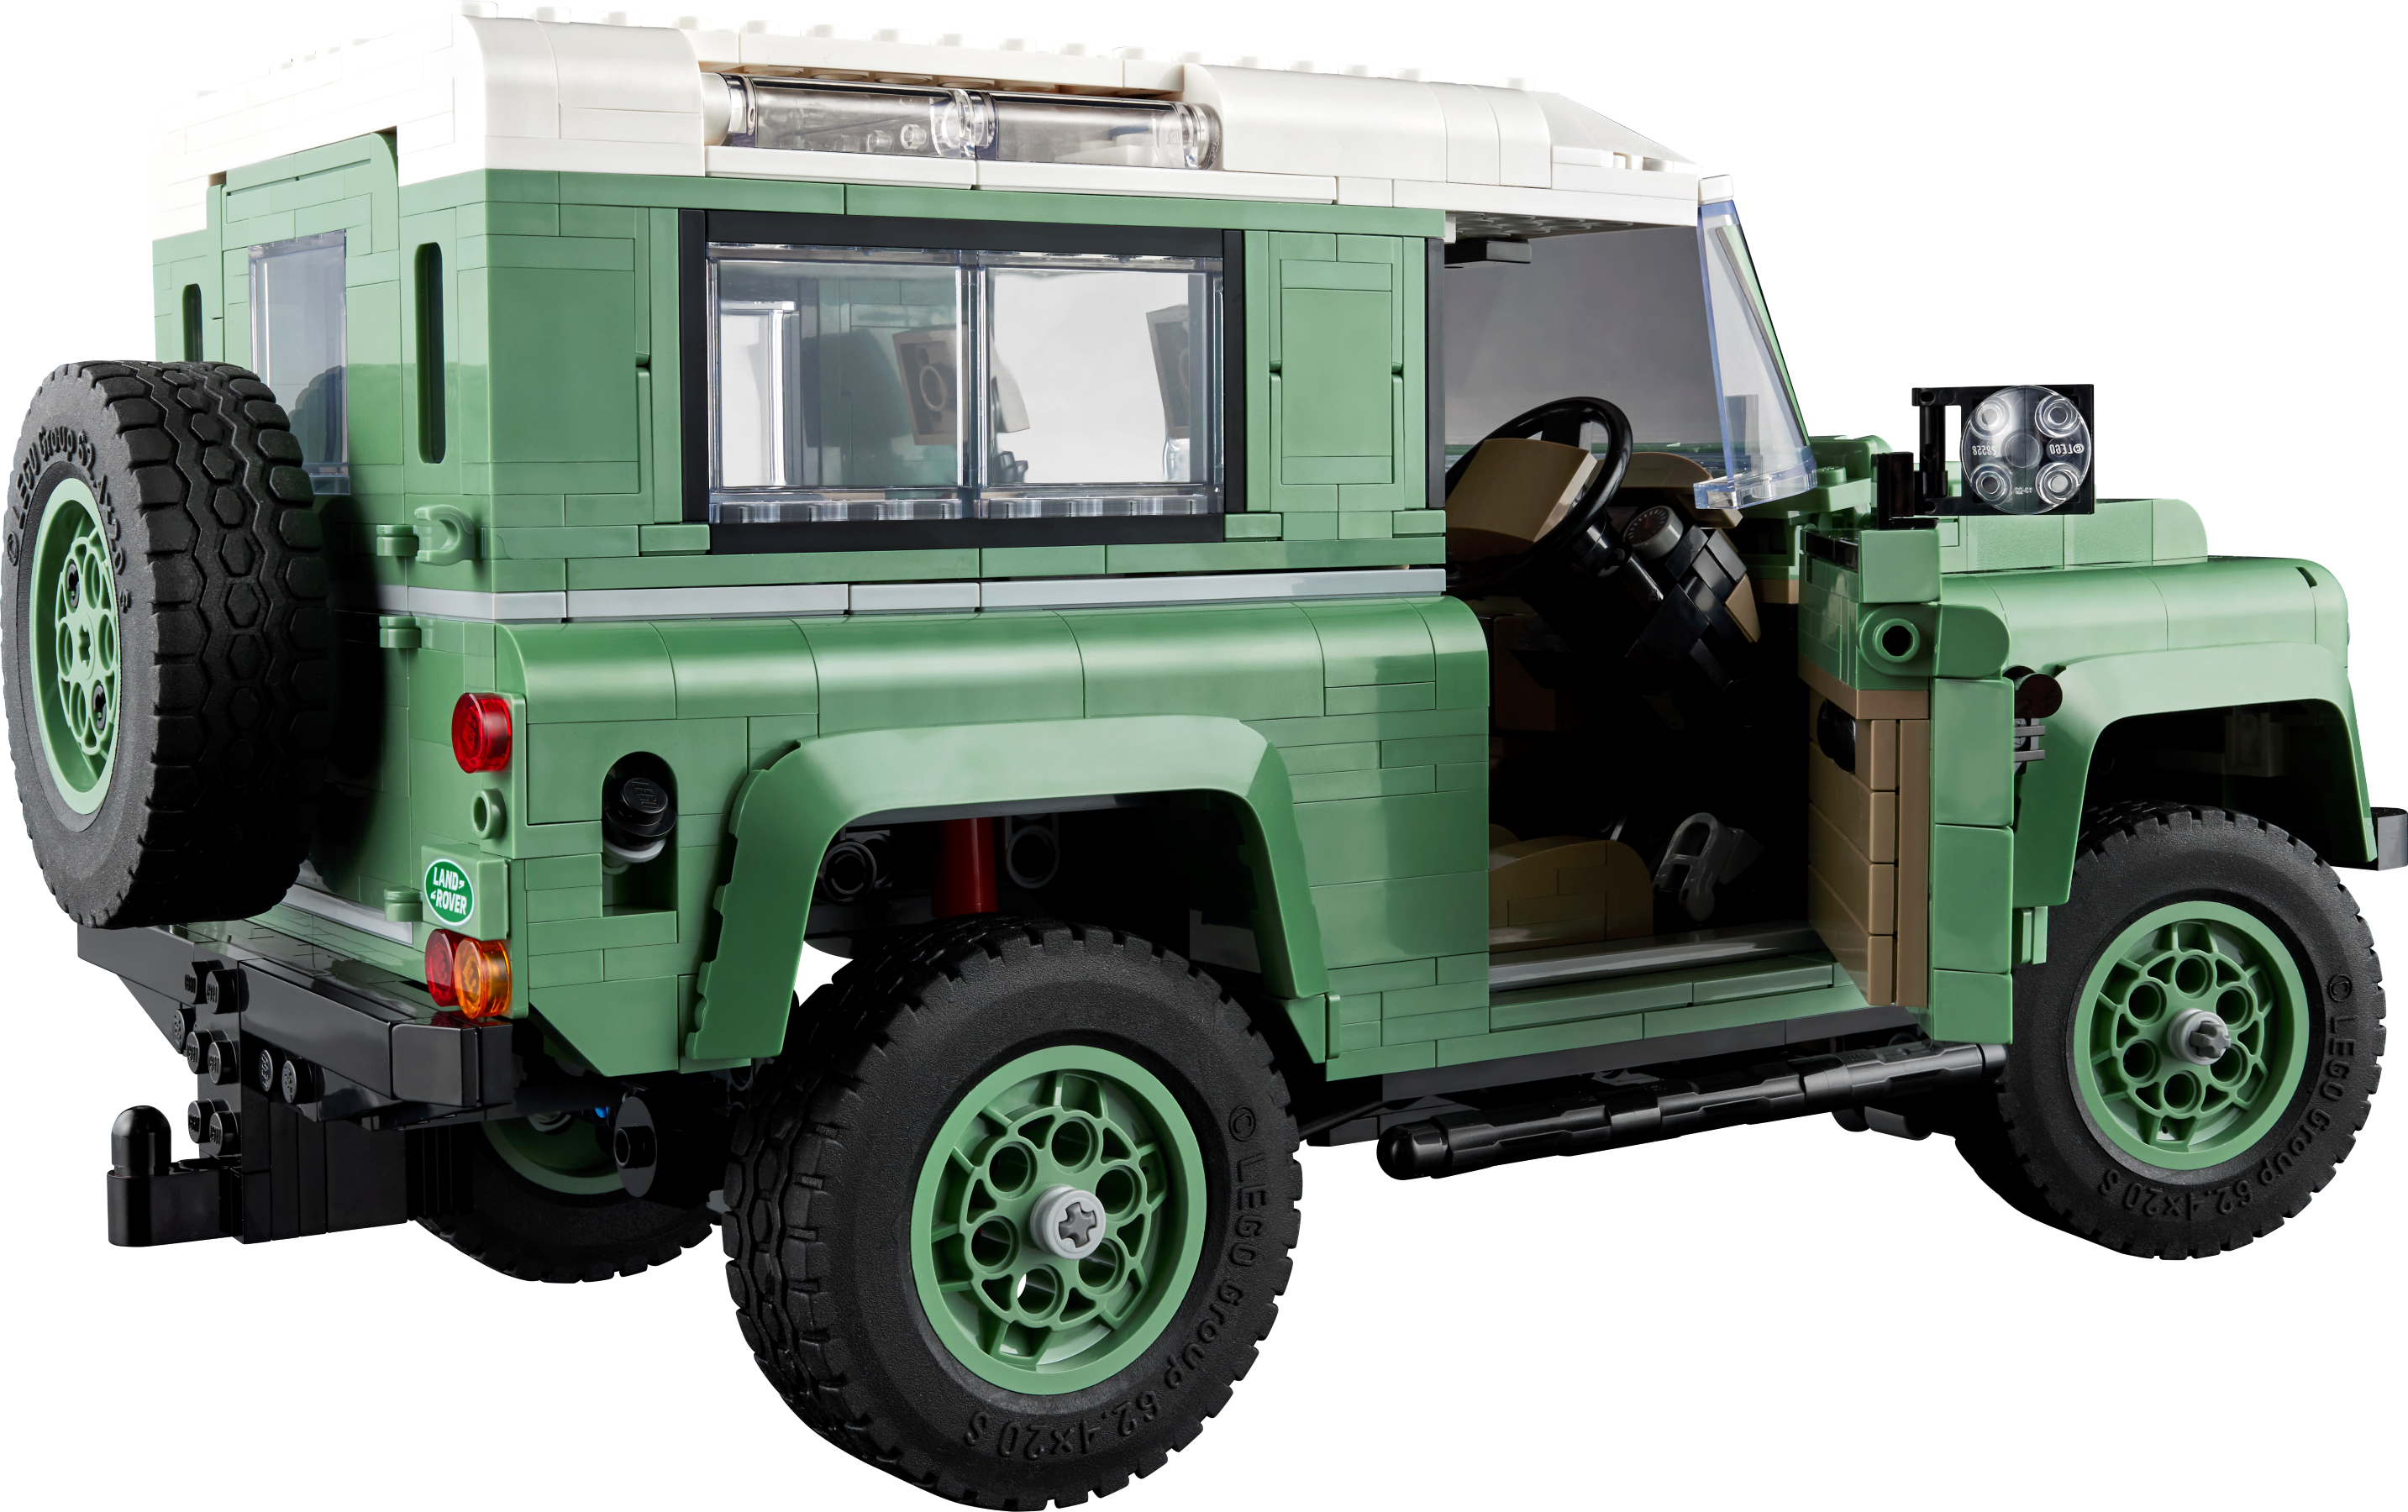 LEGO Icons 10317 Land Rover Classic Defender 90 review